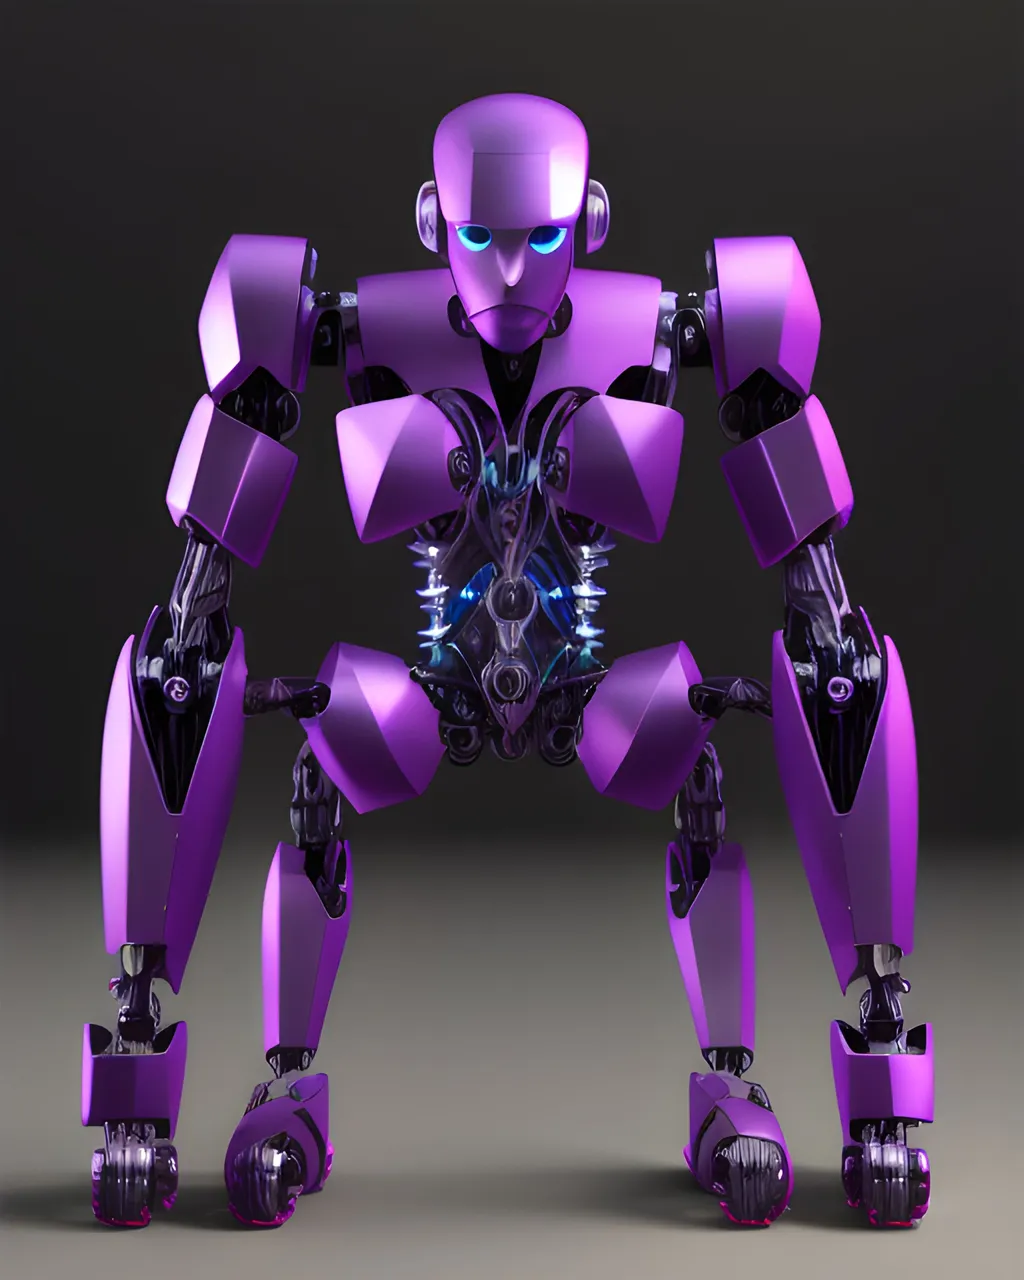 8x - Spider Robot Robotic Legs Purple Colored Skin (2).png